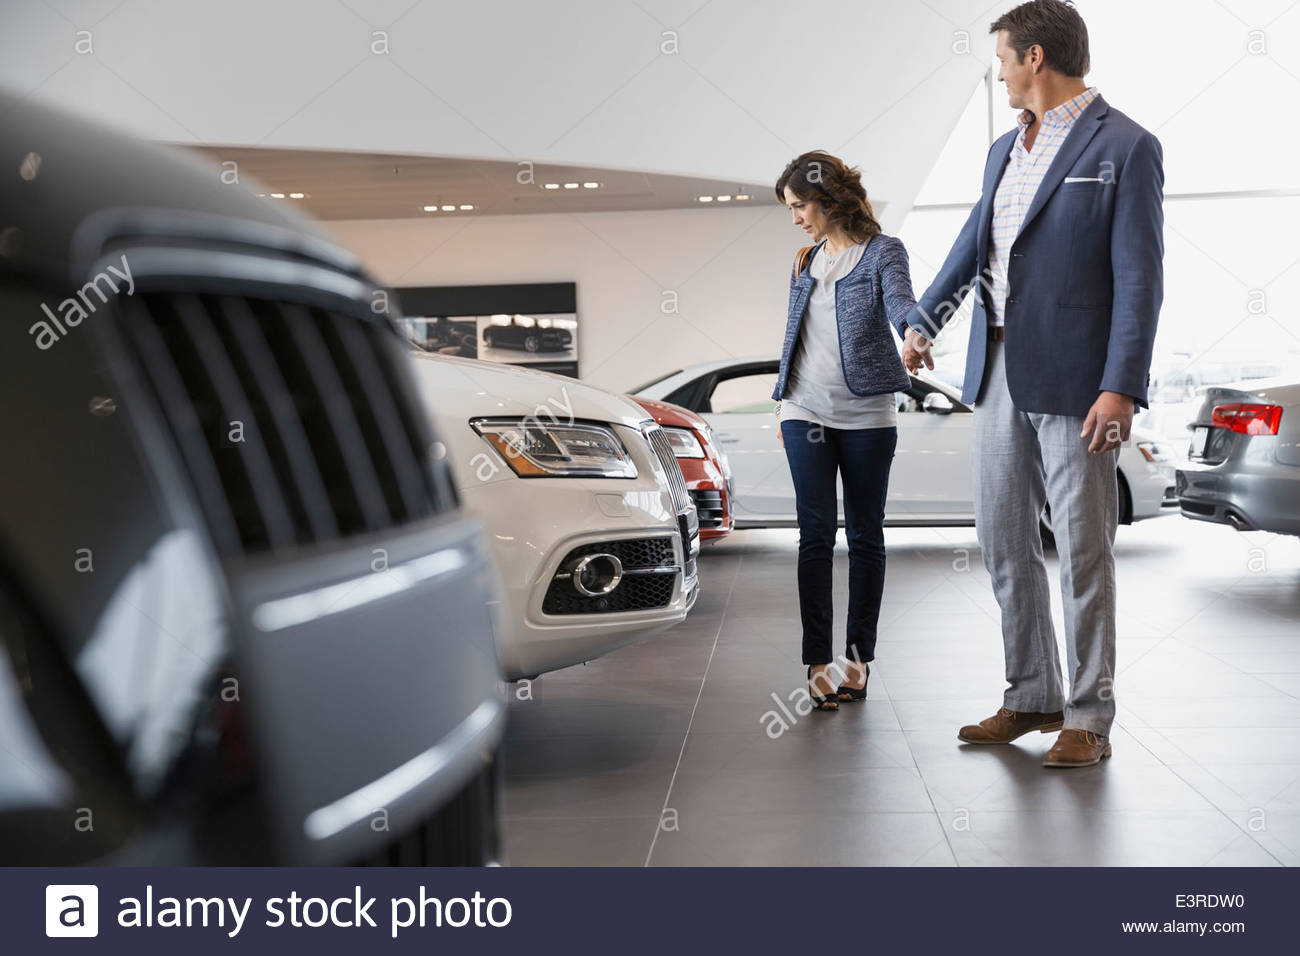 Couple shopping in car dealership showroom Stock Photo